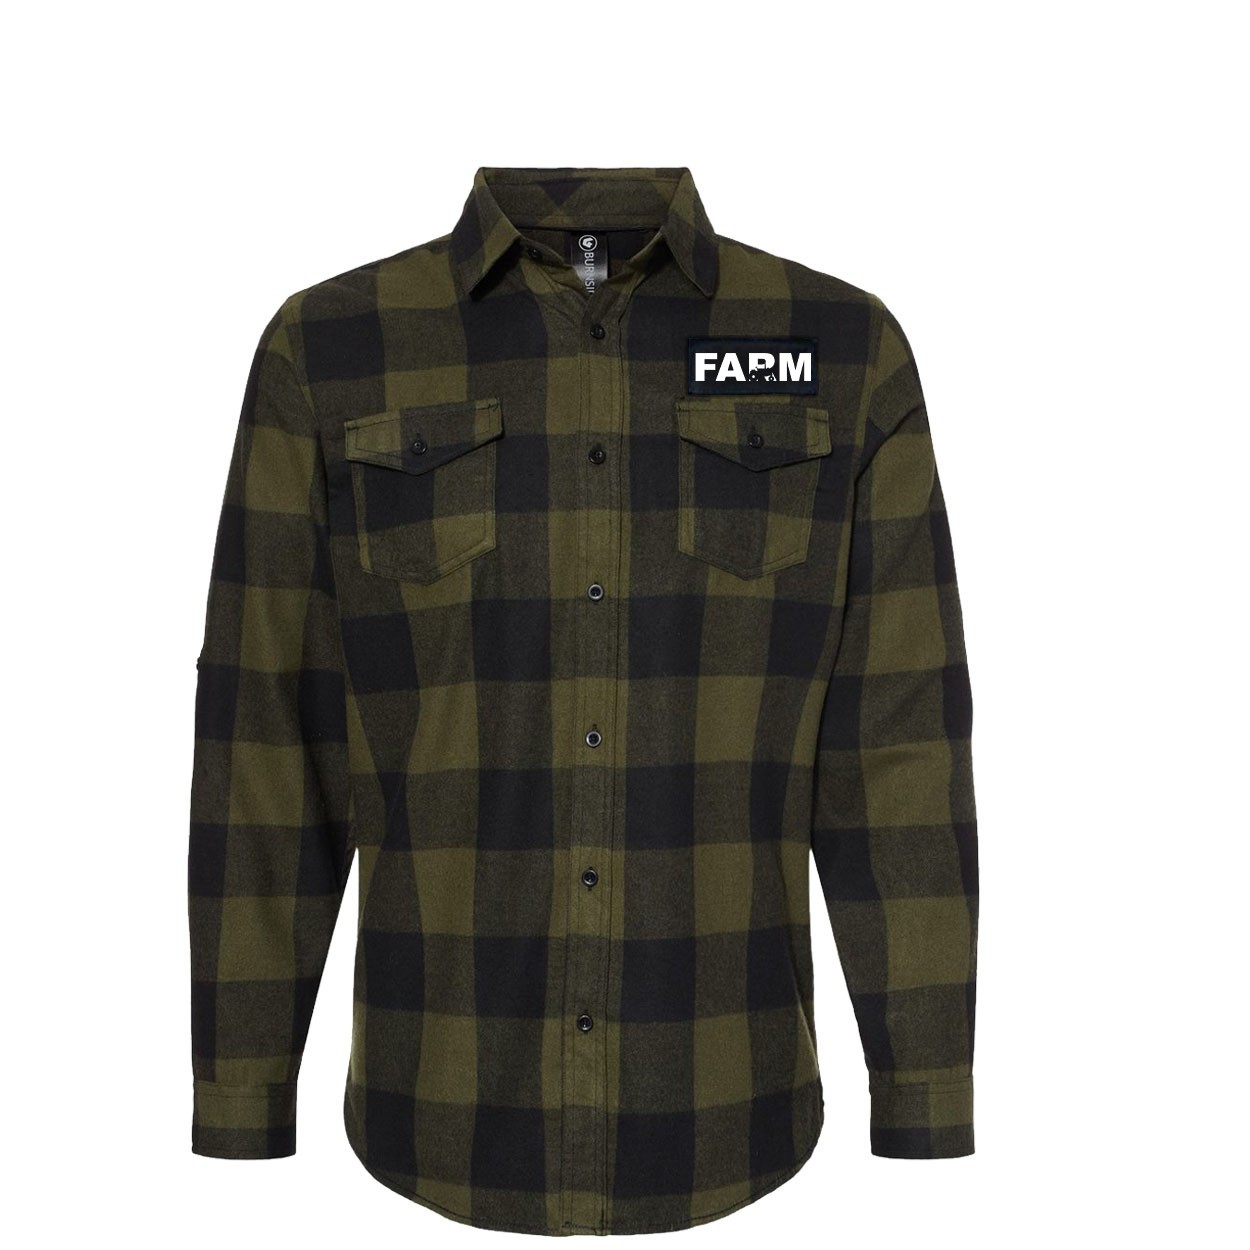 Farm Tractor Logo Classic Unisex Long Sleeve Woven Patch Flannel Shirt Army/Black (White Logo)